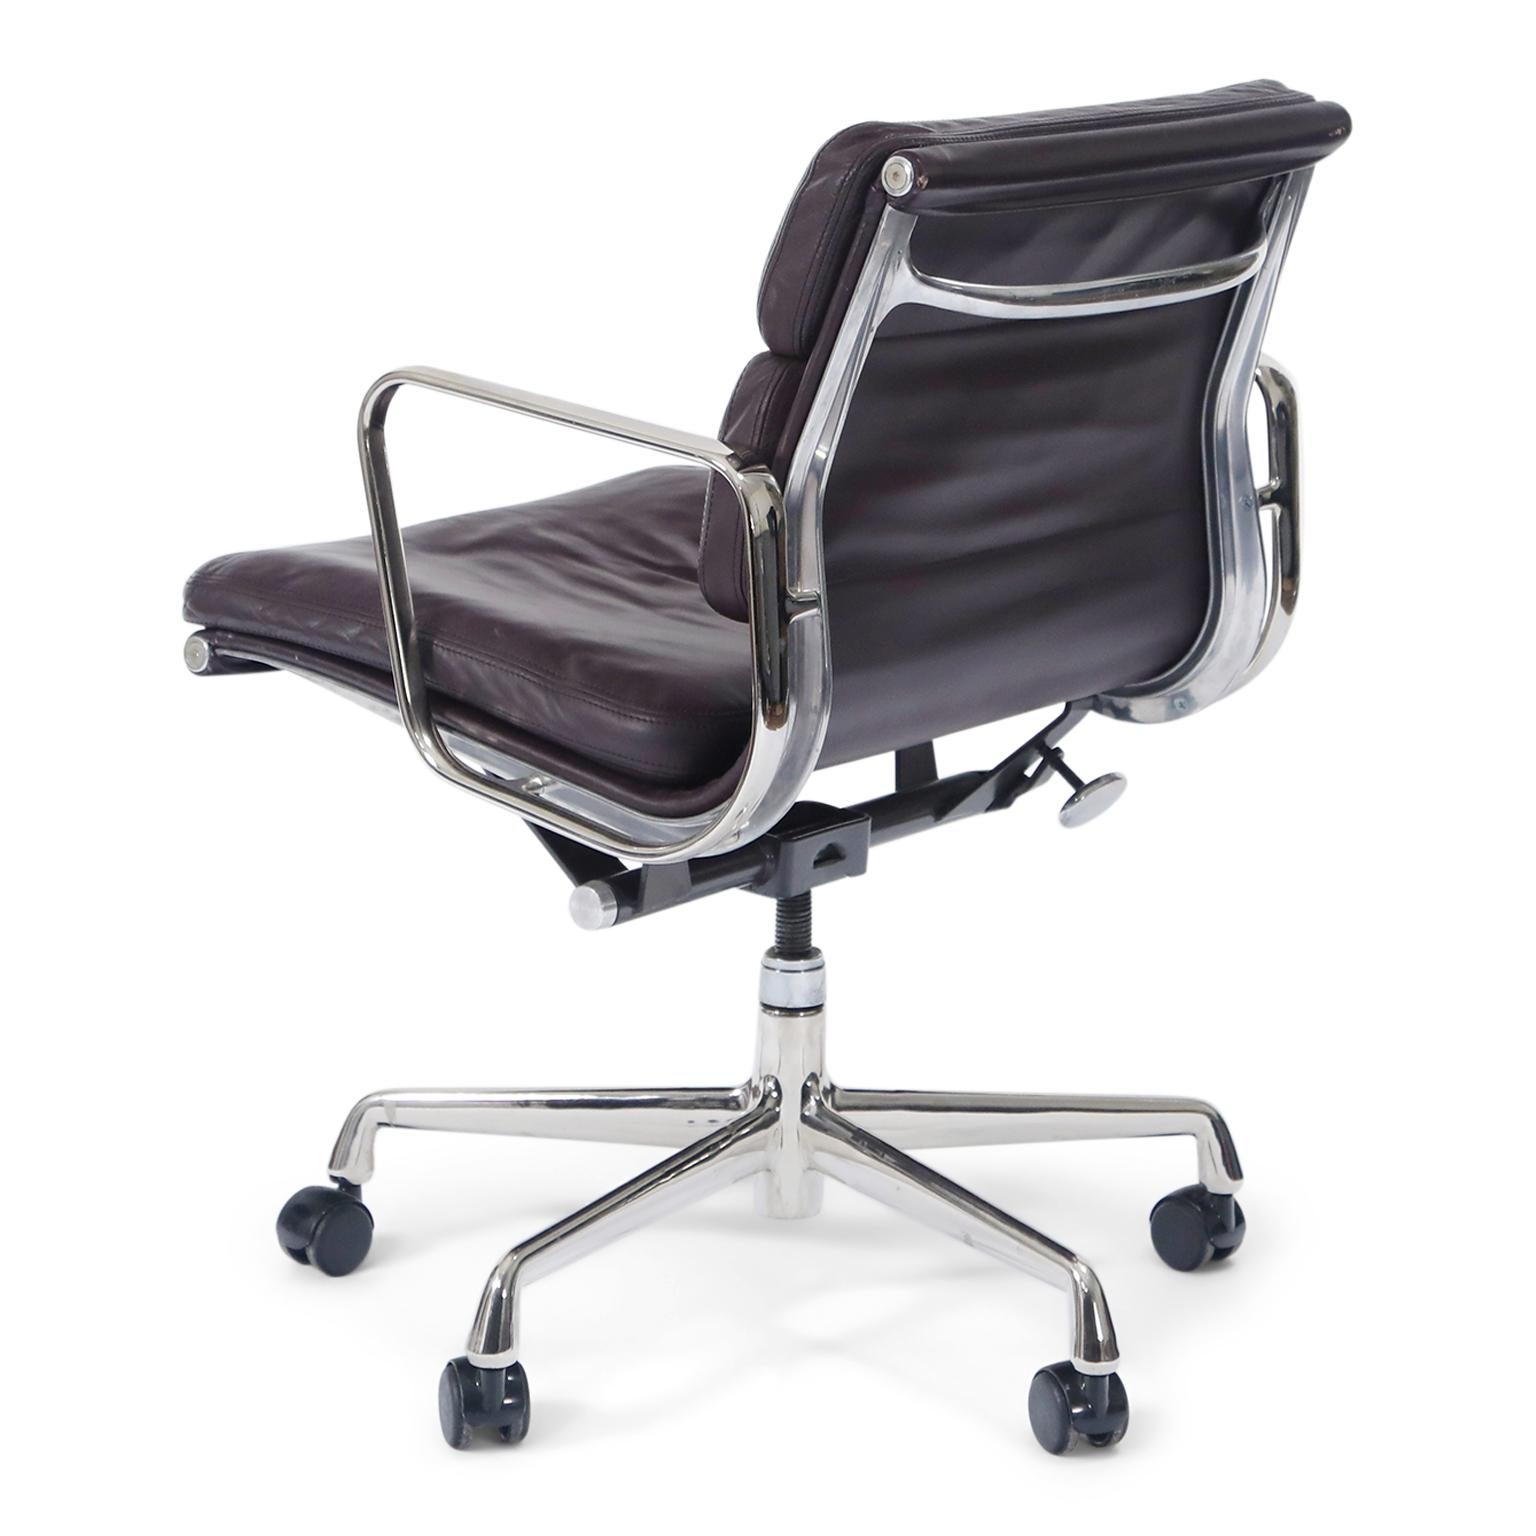 American Charles Eames for Herman Miller Auburgine Soft Pad Management Chair, circa 1980